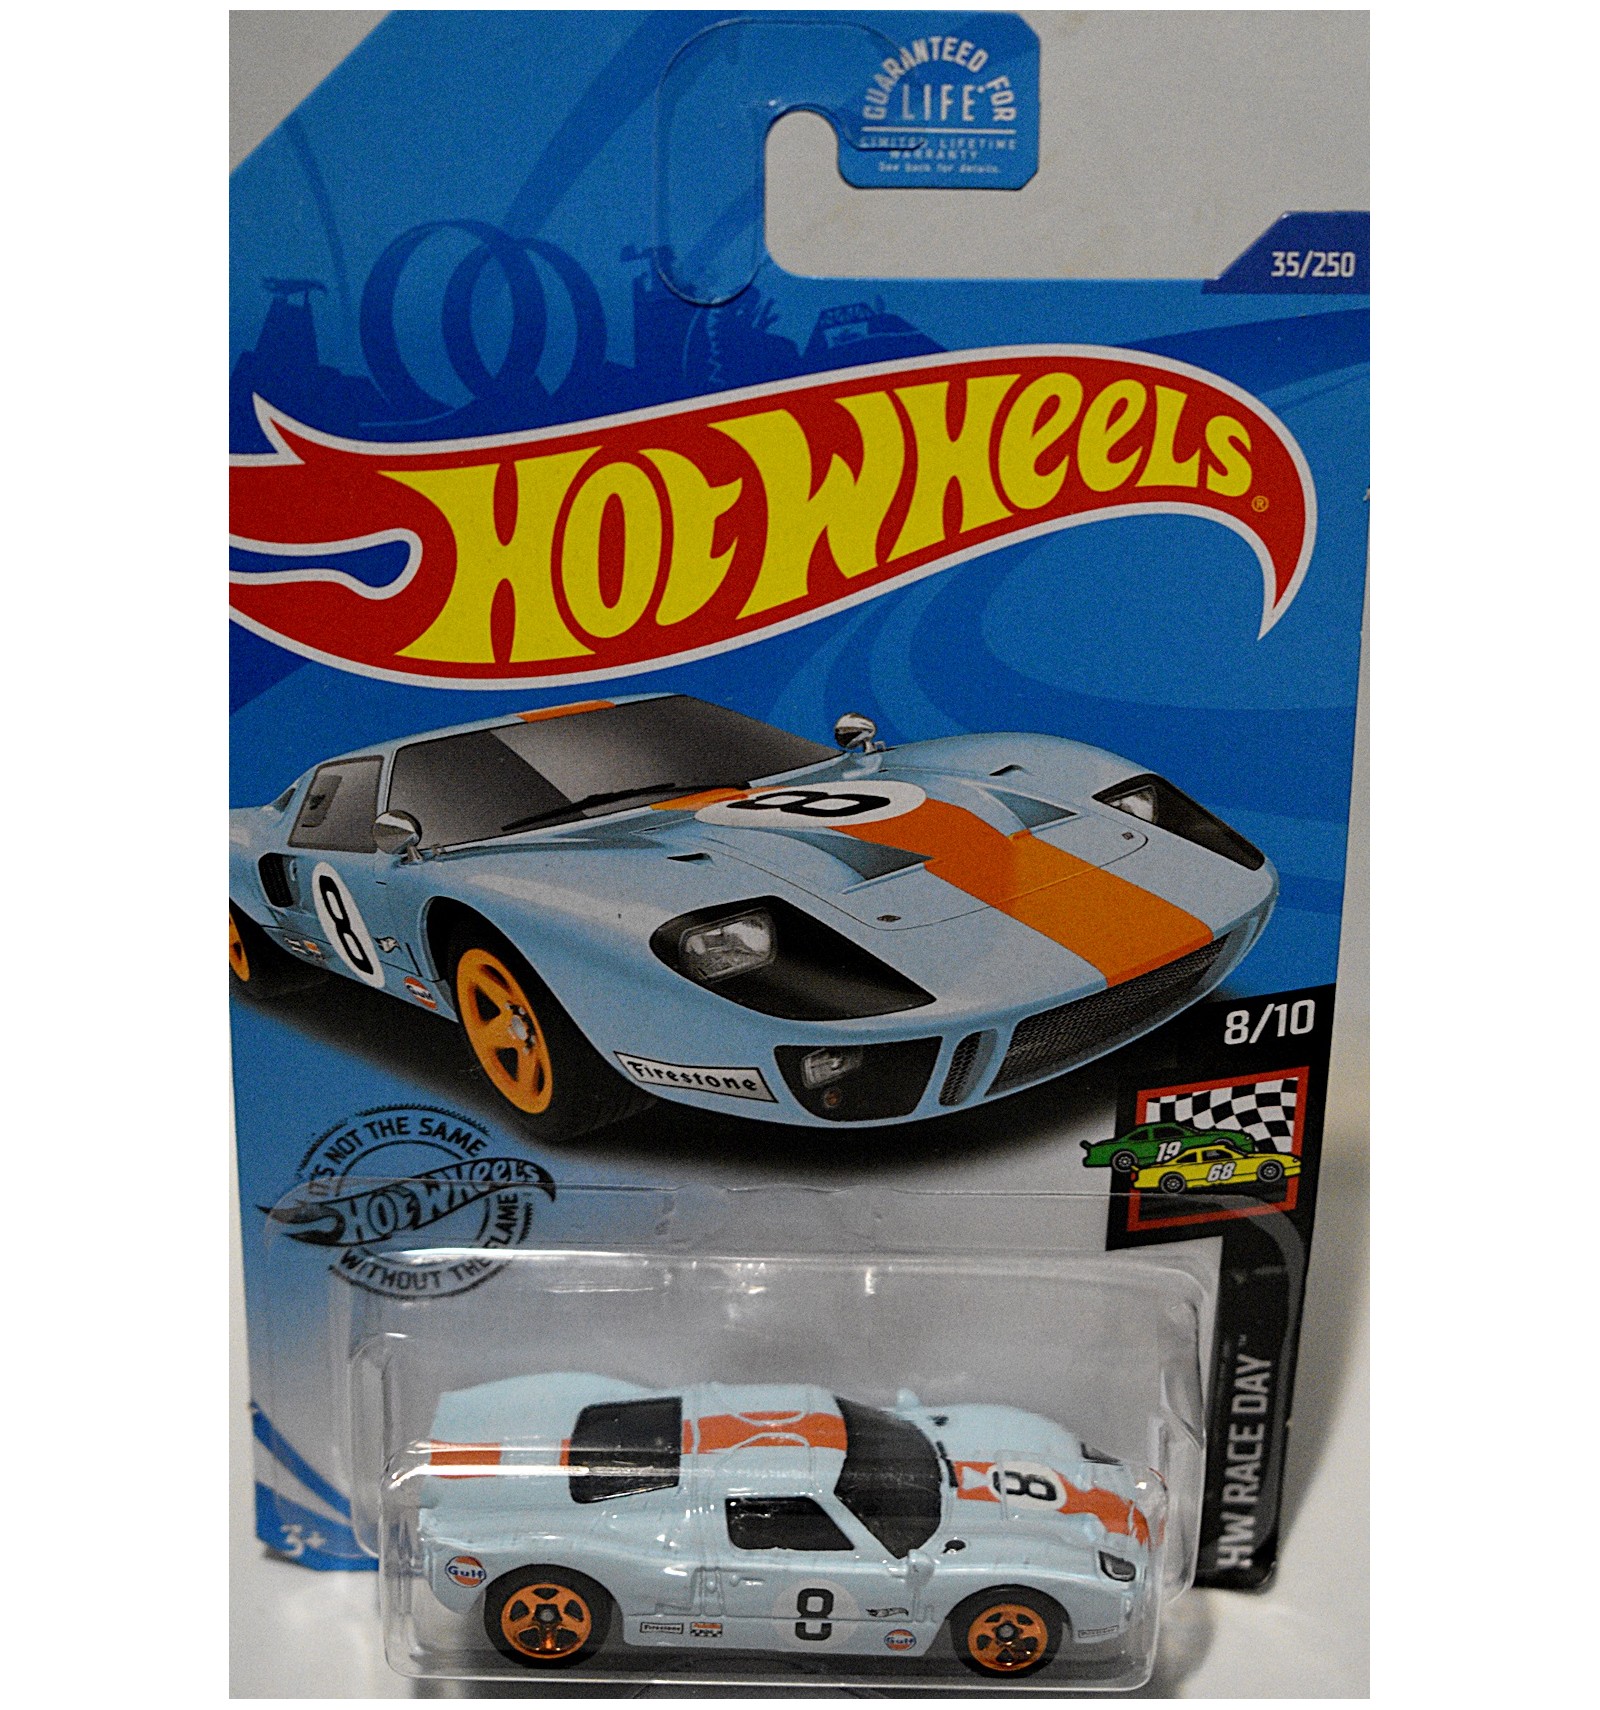 Hot Wheels Ford GT-40 